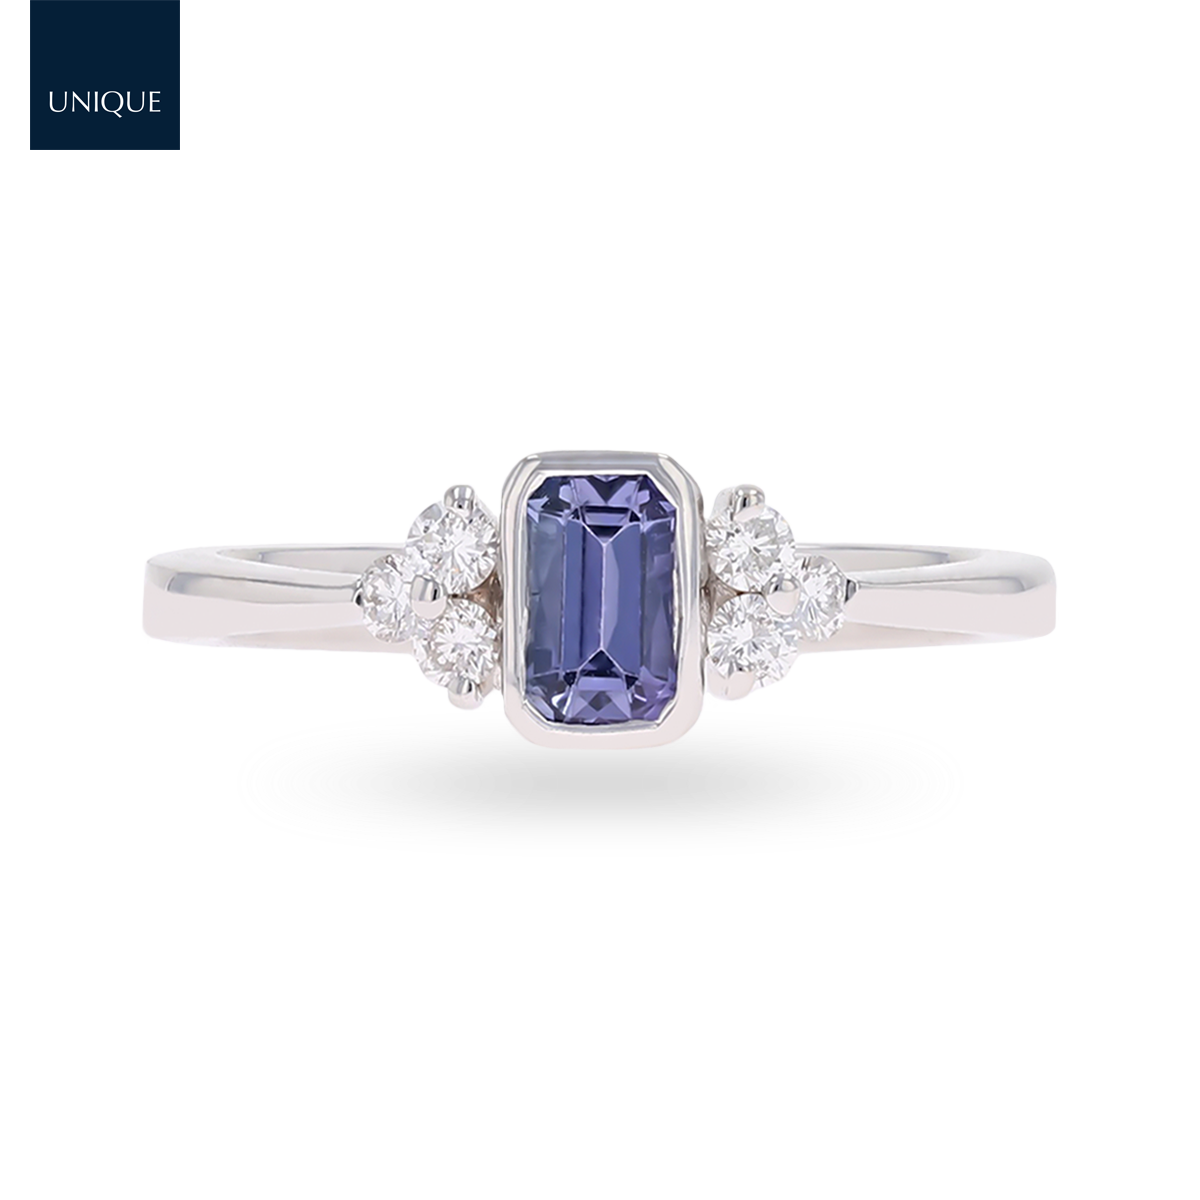 18ct White Gold Emerald Cut Tanzanite Solitaire with Diamond Set Shoulders Ring